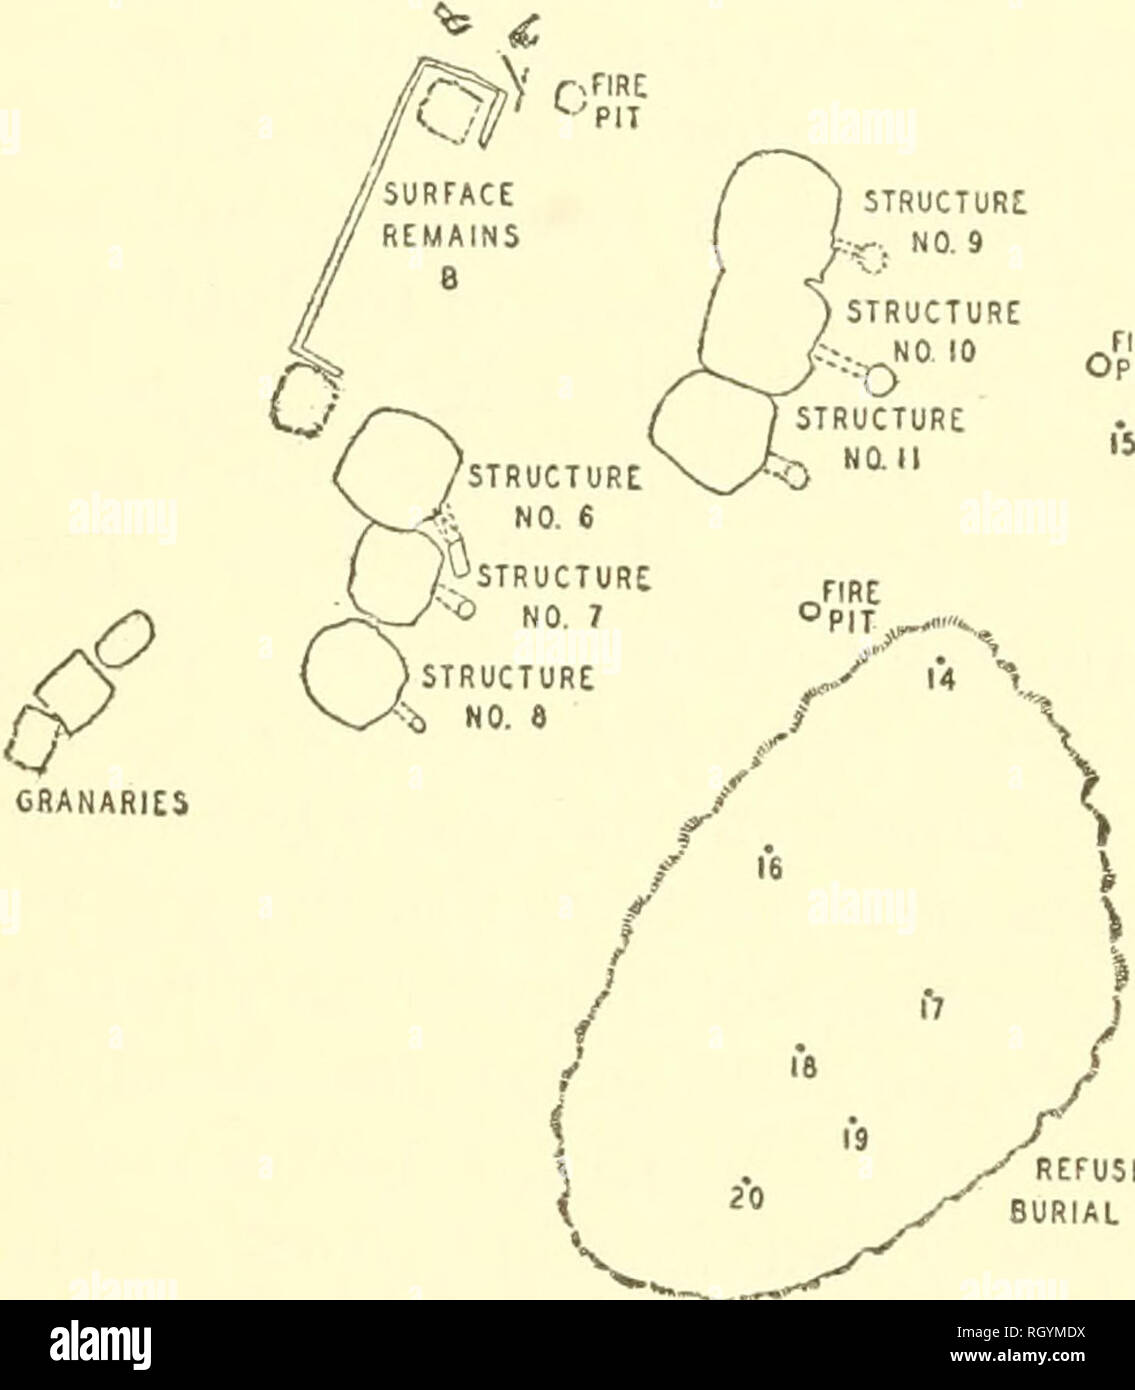 . Bulletin. Ethnology. A^5 O STRUCT 3 N0.4 URt t y ) &quot;^ RETUSE AND BURJAL MOUNO STRUCTURES   , NO. 5. FOl NO. 5k â -o. 1 V. REFUSE AND BURIAL MOUND FiGUEE 1.âGroup 1 pit and surface remains. Numbered dots indicate location of burials. from the beginning of the use of pit structures. Traces of their pres- ence were found in pit dwellings at the Long H Ranch &quot; and a num- ber of the structures excavated in 1931 and 1932, in addition to No. 1, gave ummstakable evidence of their use. It is not possible, of course, Â» Roberts, 1931, pp. 33-34, 56.. Please note that these images are extract Stock Photo